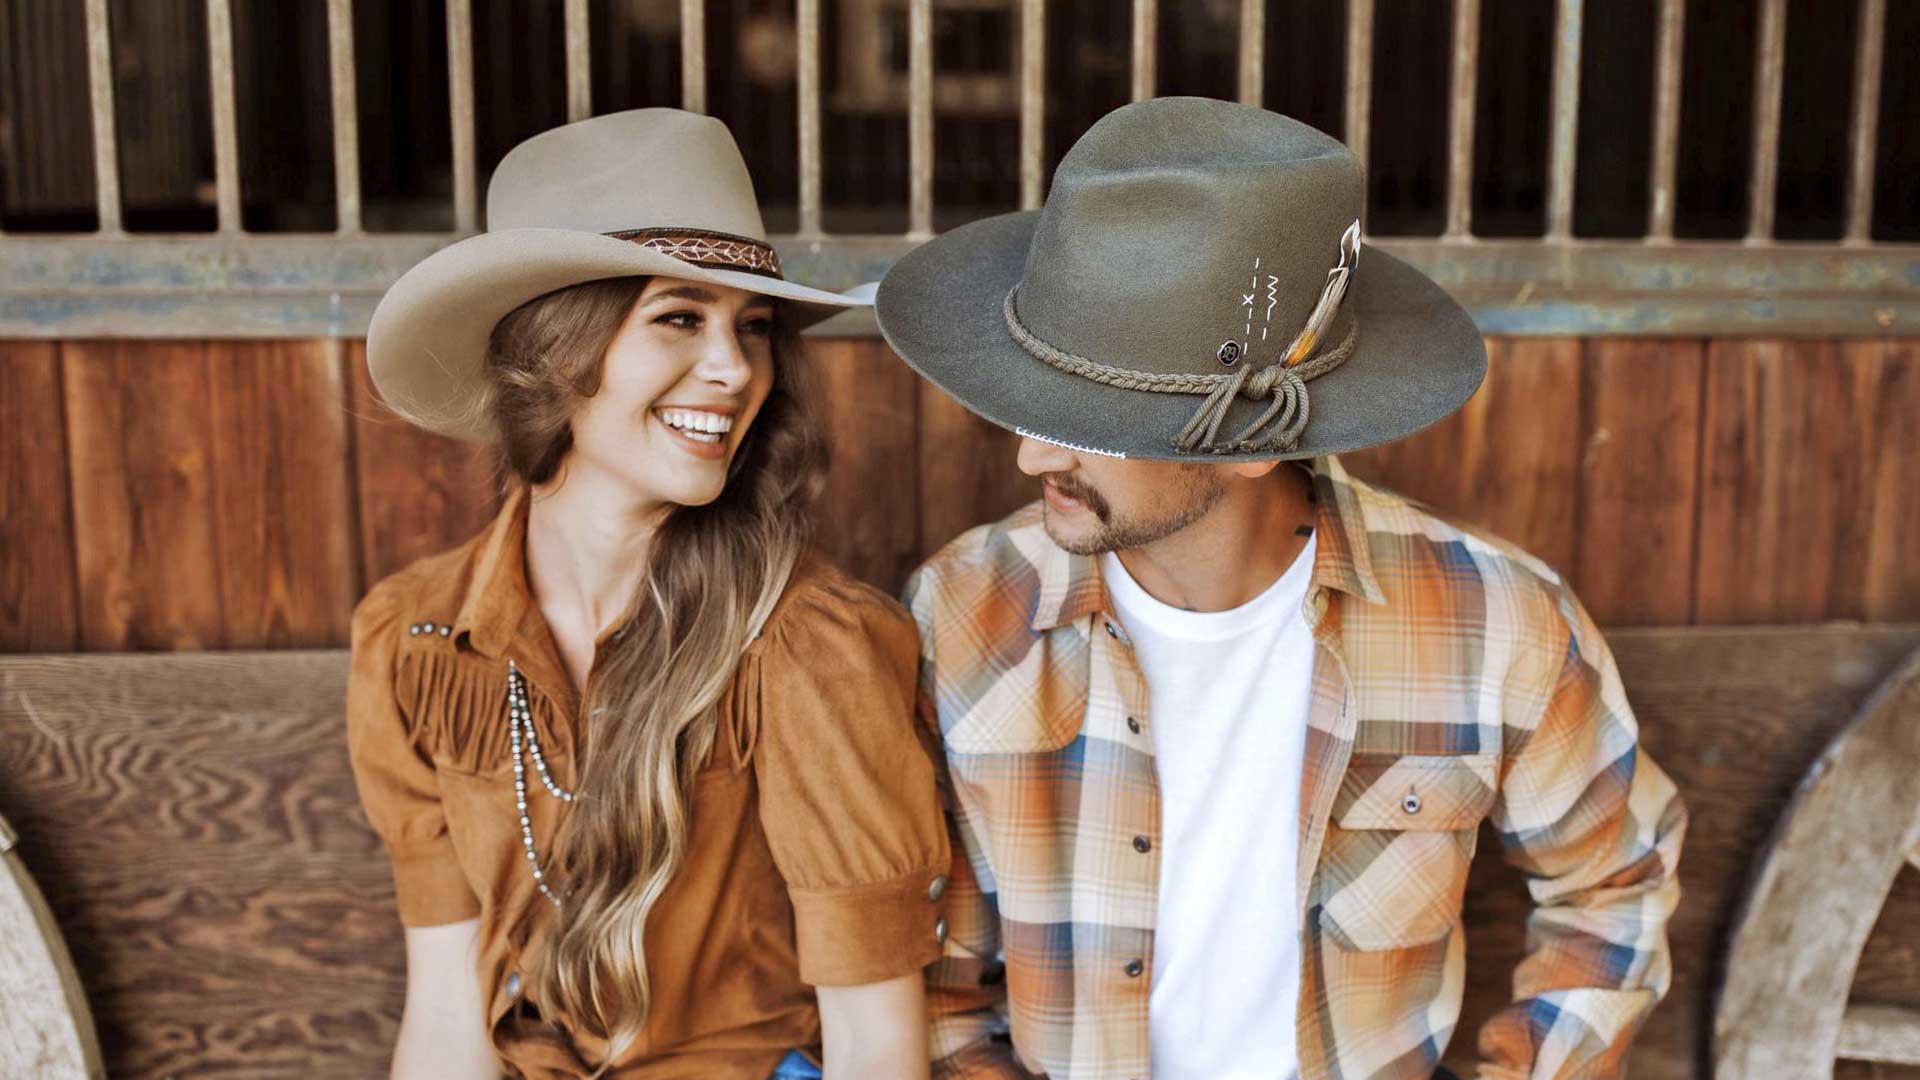 Woman and man smiling at each other wearing cowboy hat and attire leaning against a horse stable